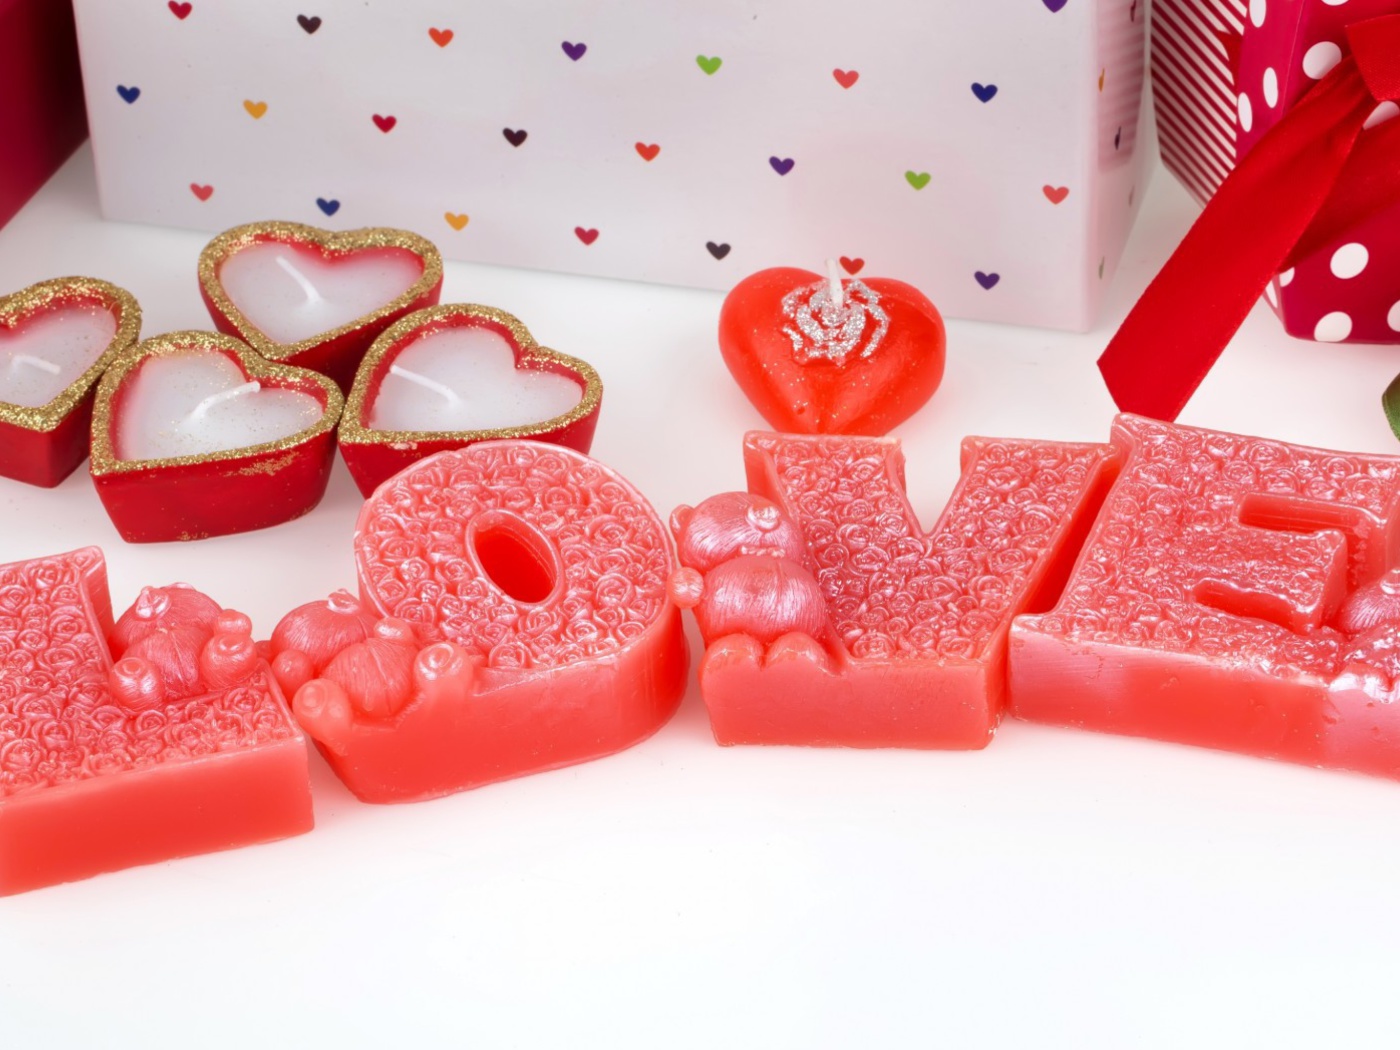 Valentines Day Candles Scents wallpaper 1400x1050